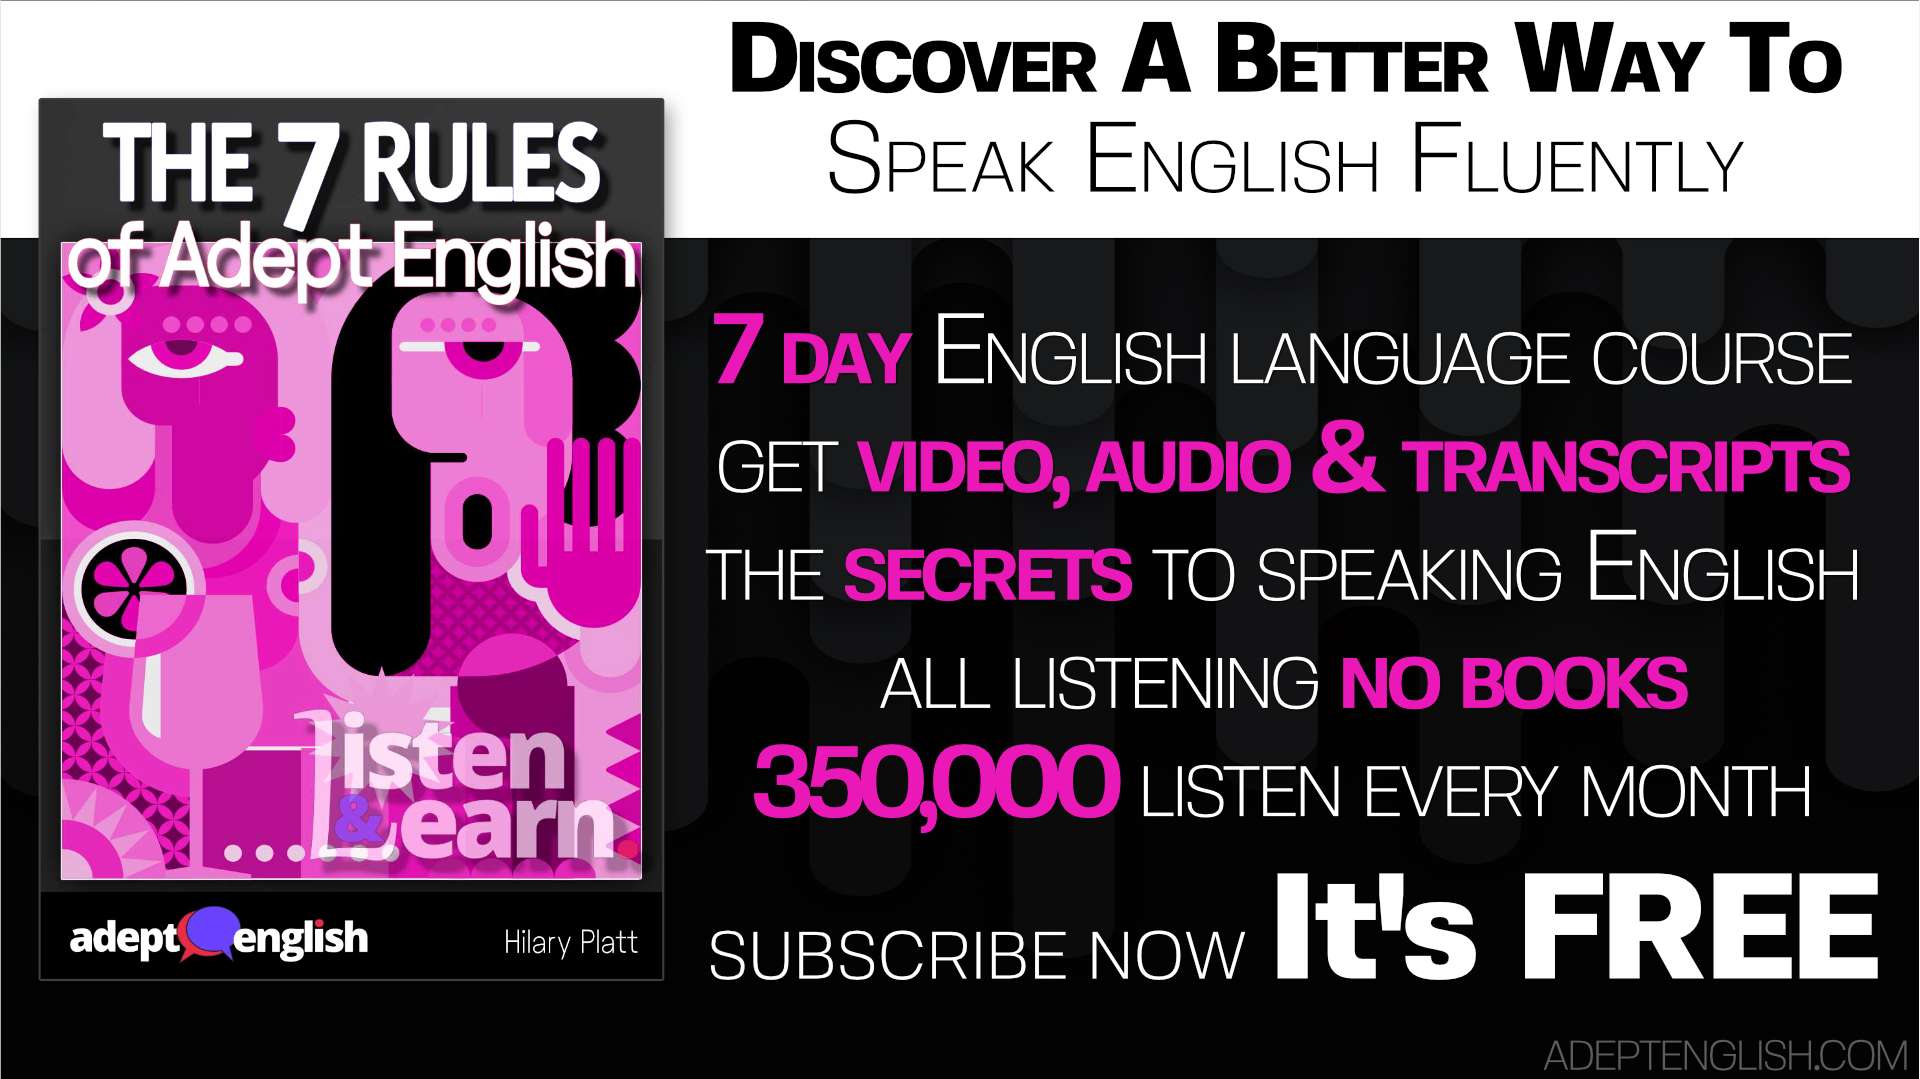 Learn to speak English fluently with a free 7 day language course from Adept English.